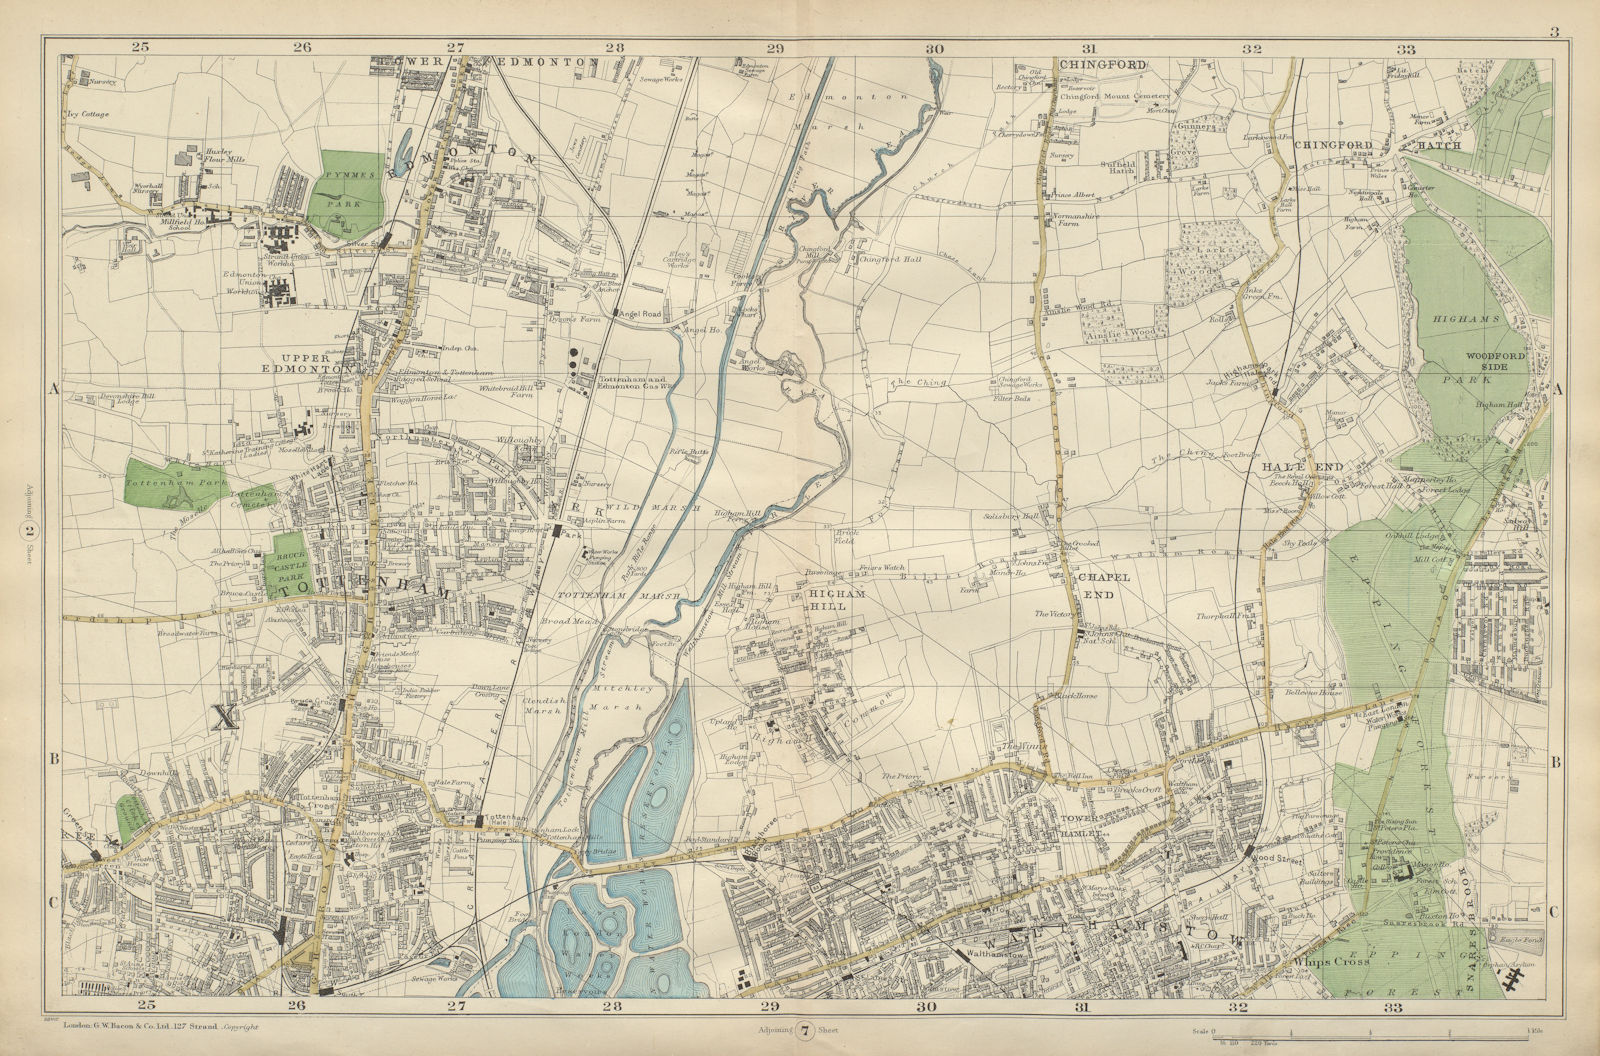 TOTTENHAM WALTHAMSTOW EDMONTON Chingford Hale End Epping Forest BACON 1900 map